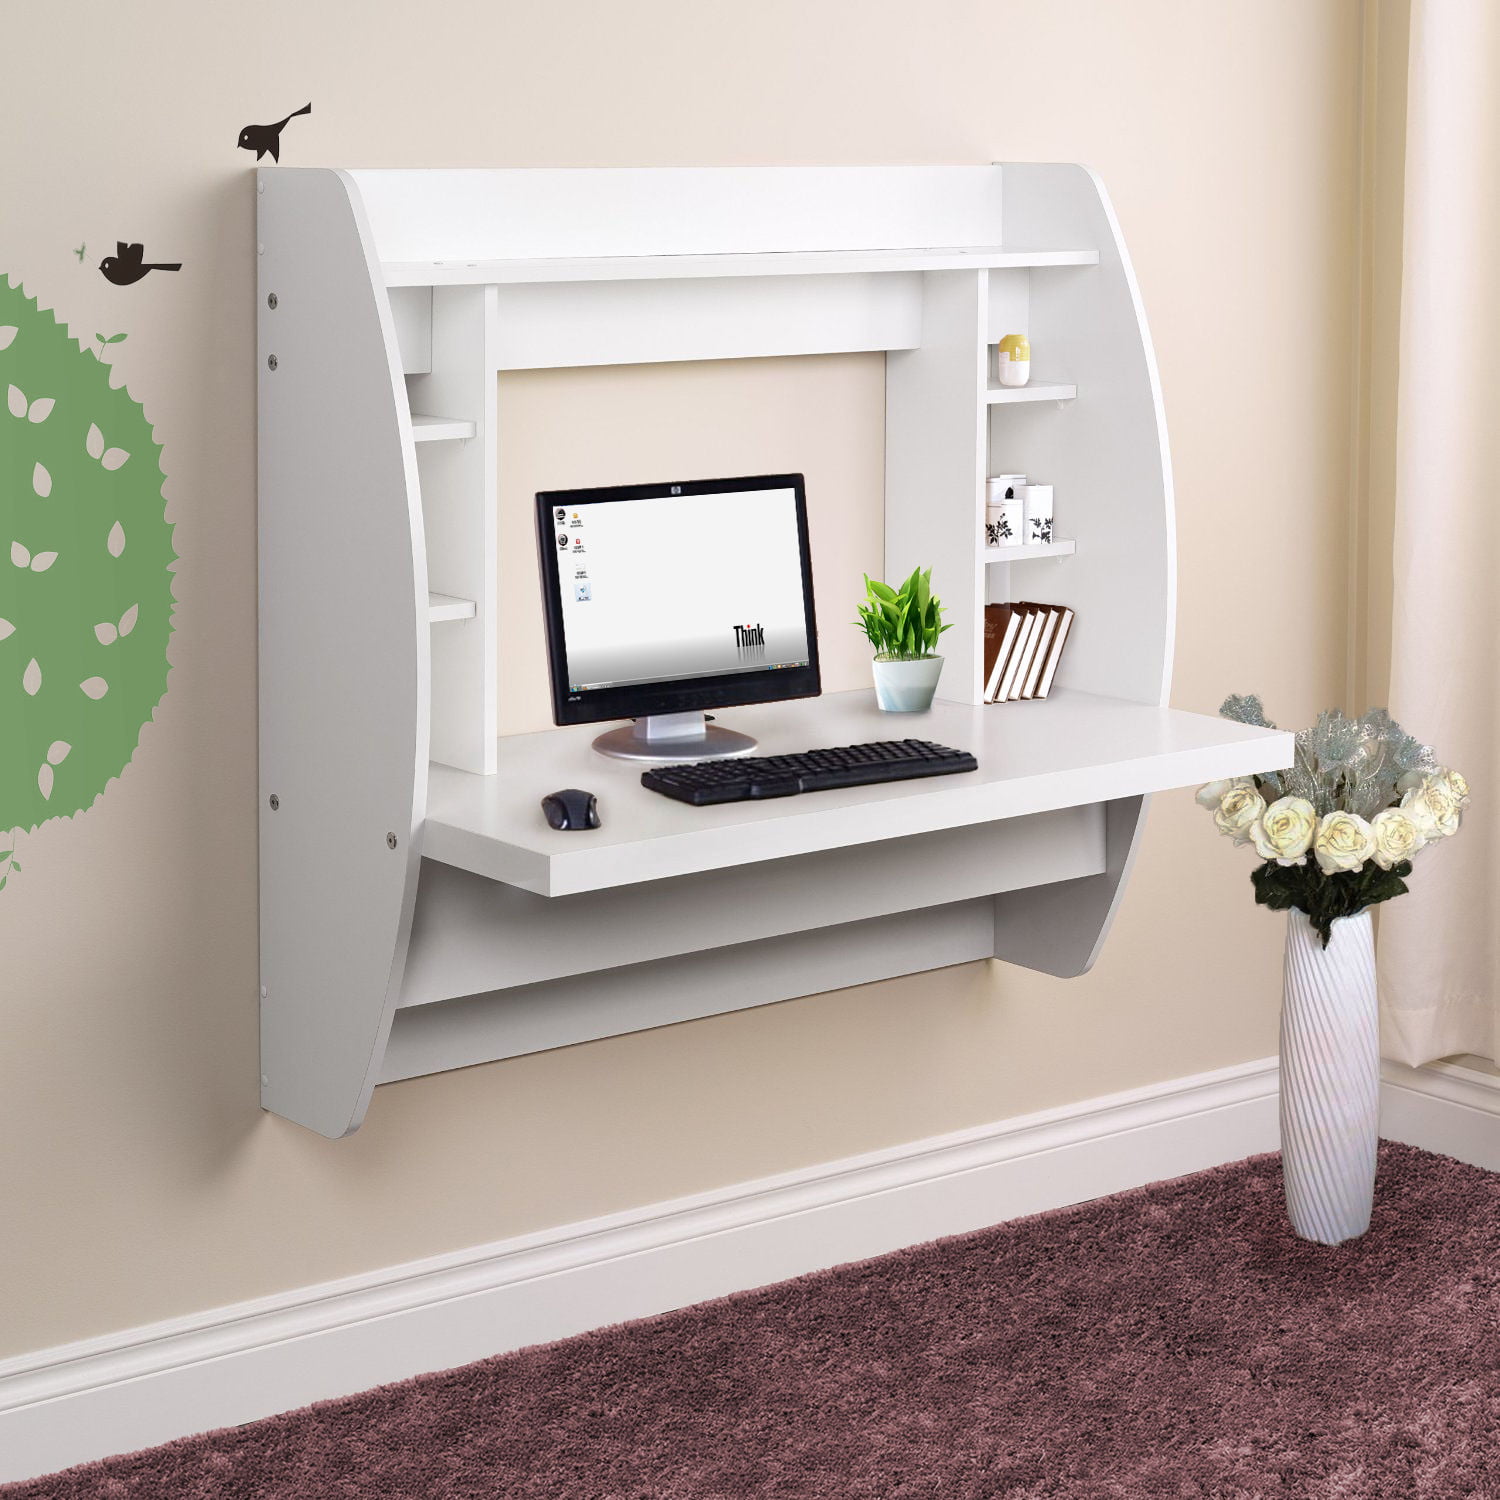 Zimtown Wall Mounted Computer Desk Floating Office Home PC ...